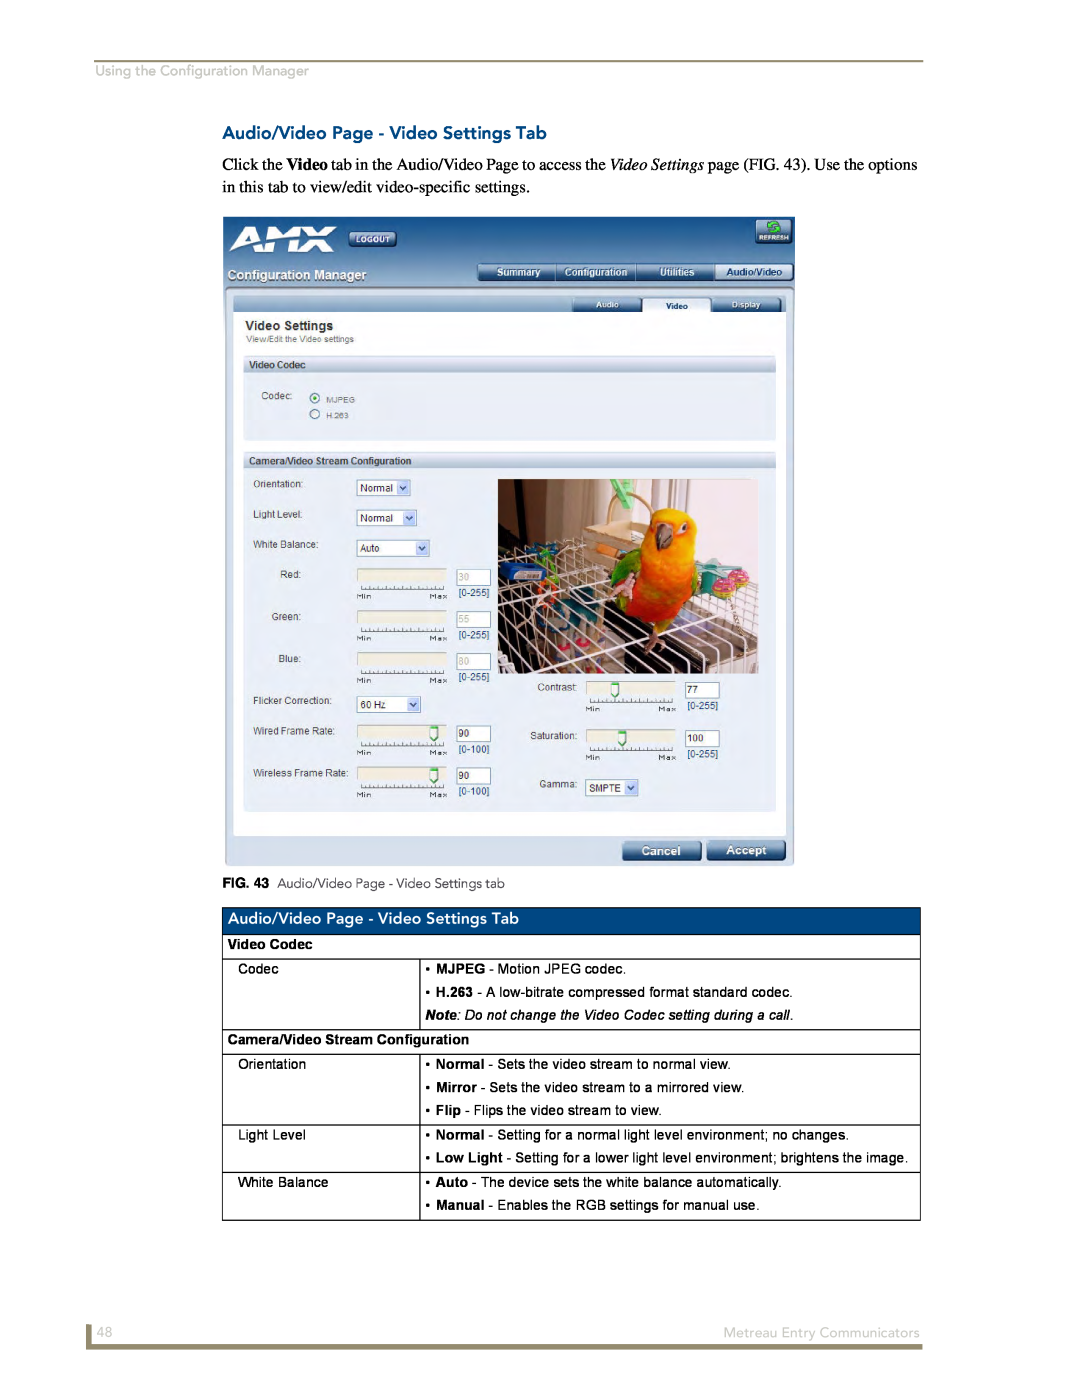 AMX MET-ECOM-D manual Audio/Video Page - Video Settings Tab, Using the Configuration Manager, Metreau Entry Communicators 